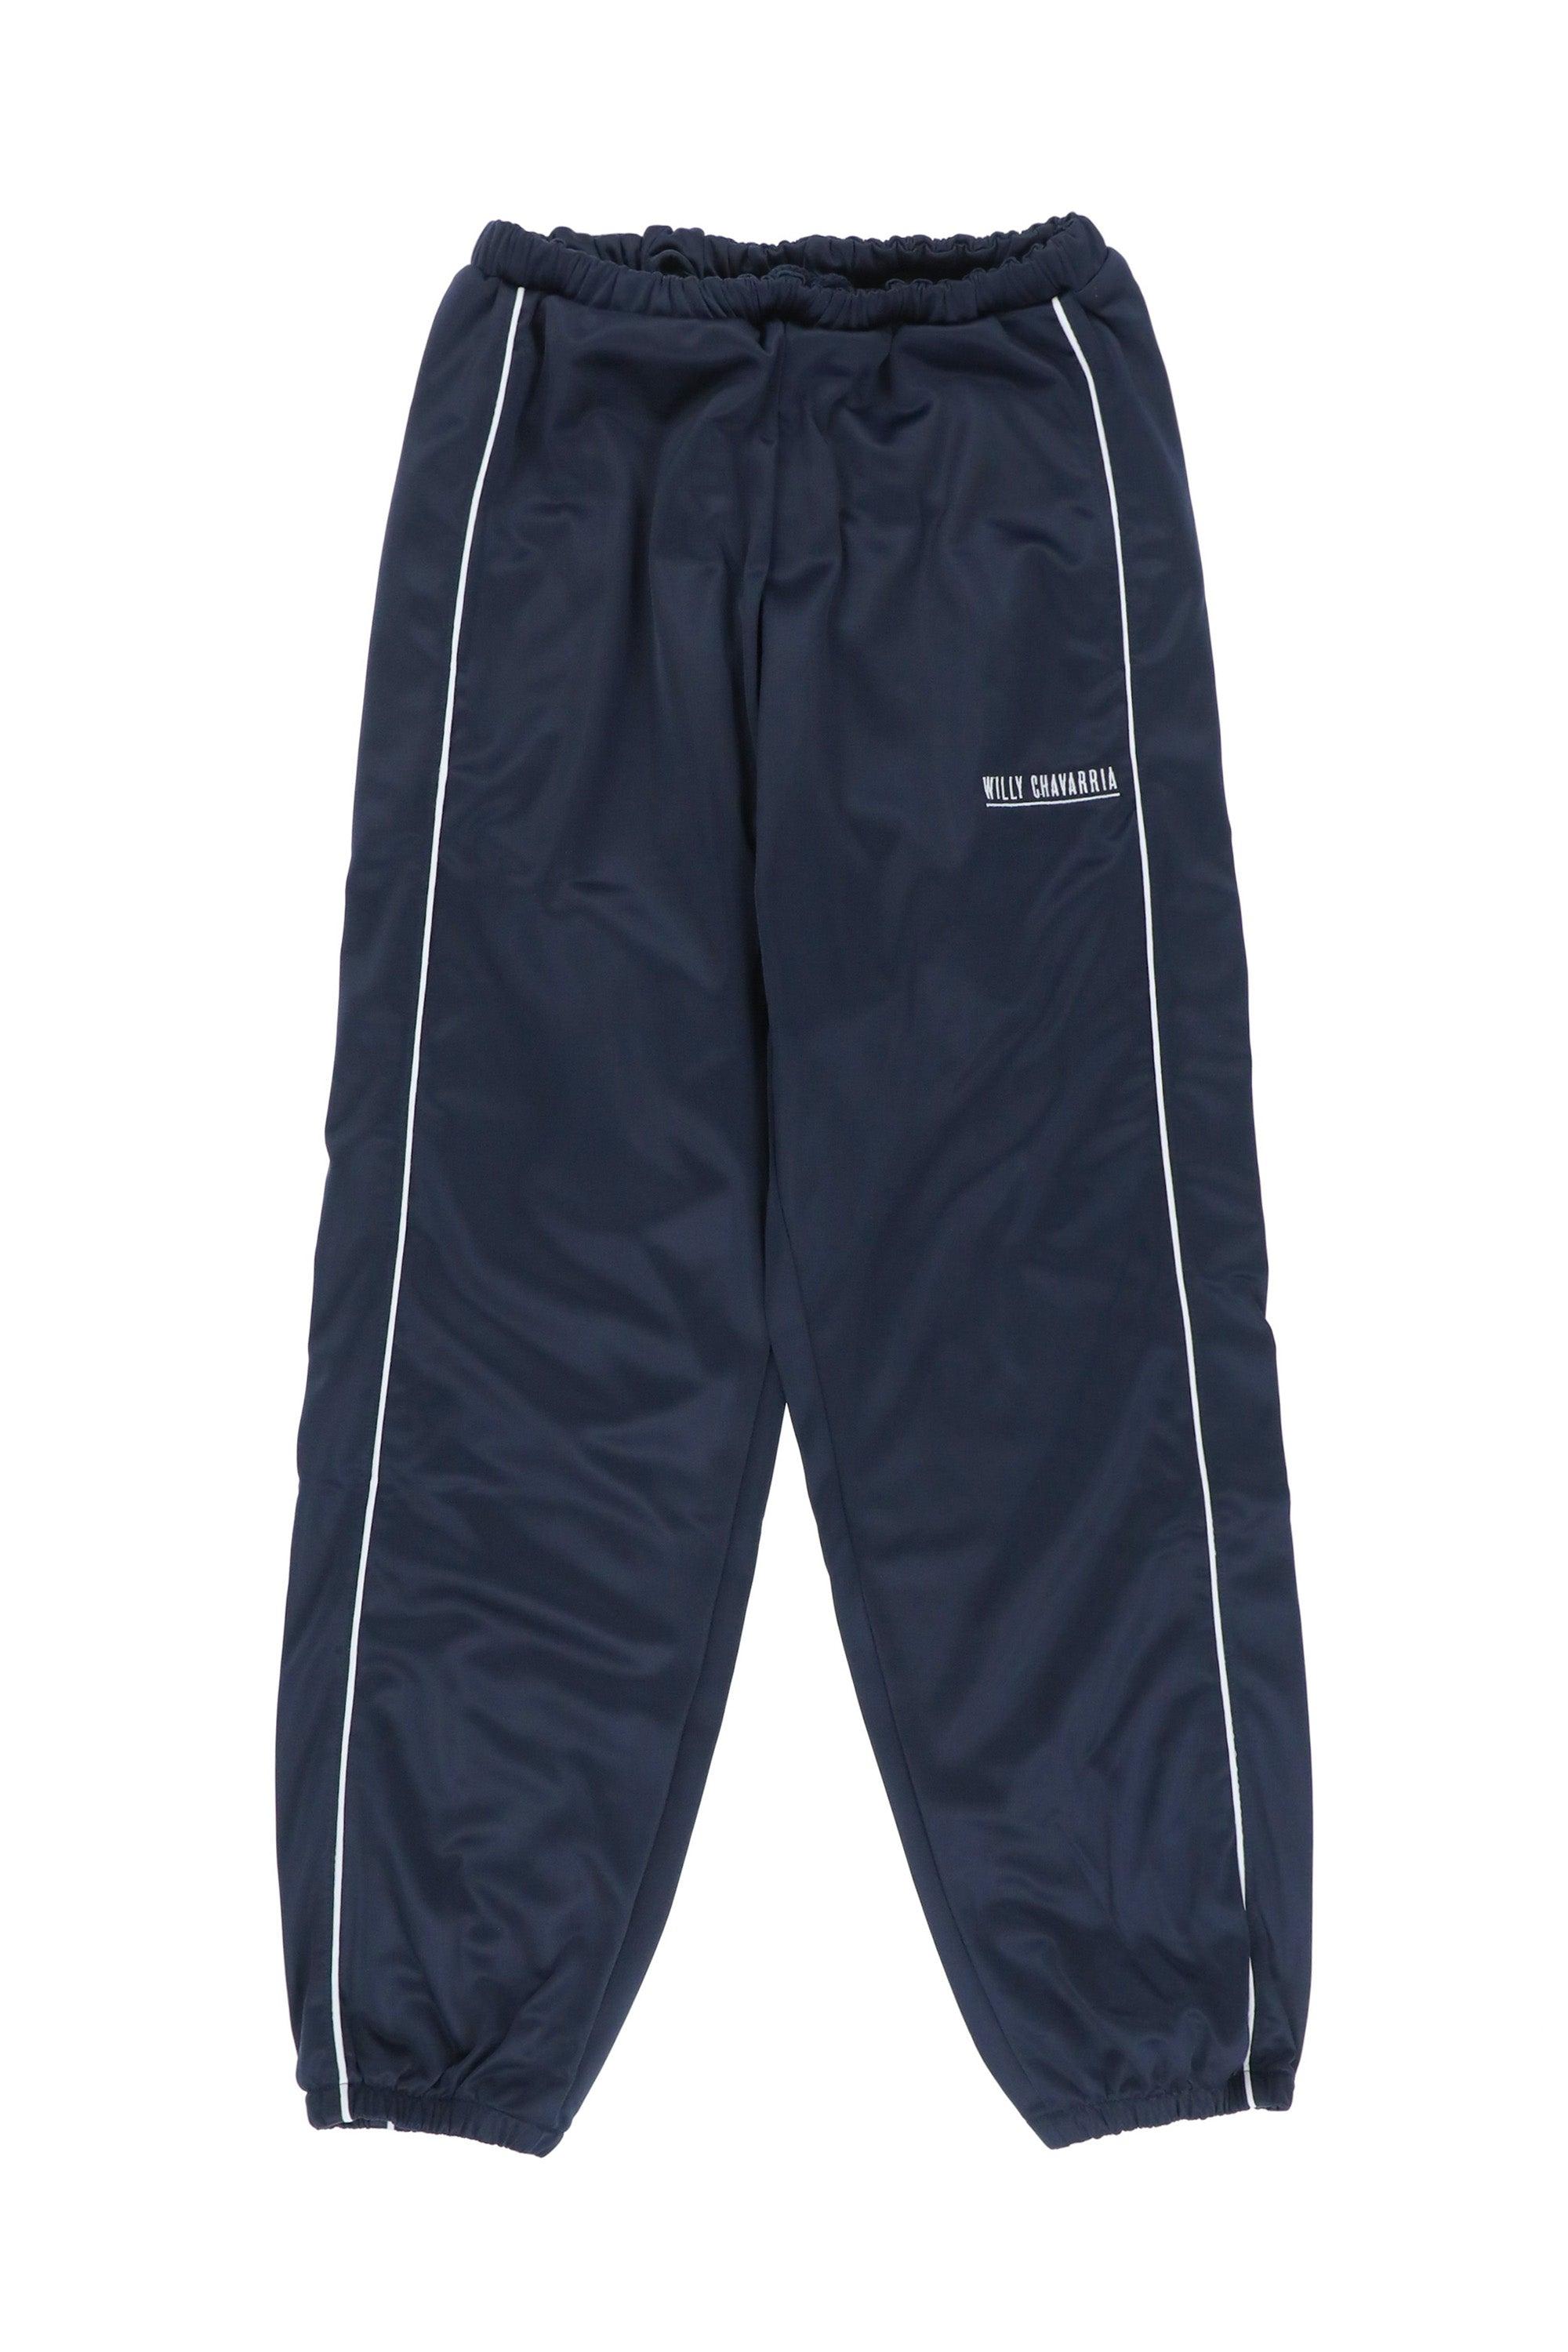 Willy Chavarria Buffalo Track Pant in Blue for Men | Lyst